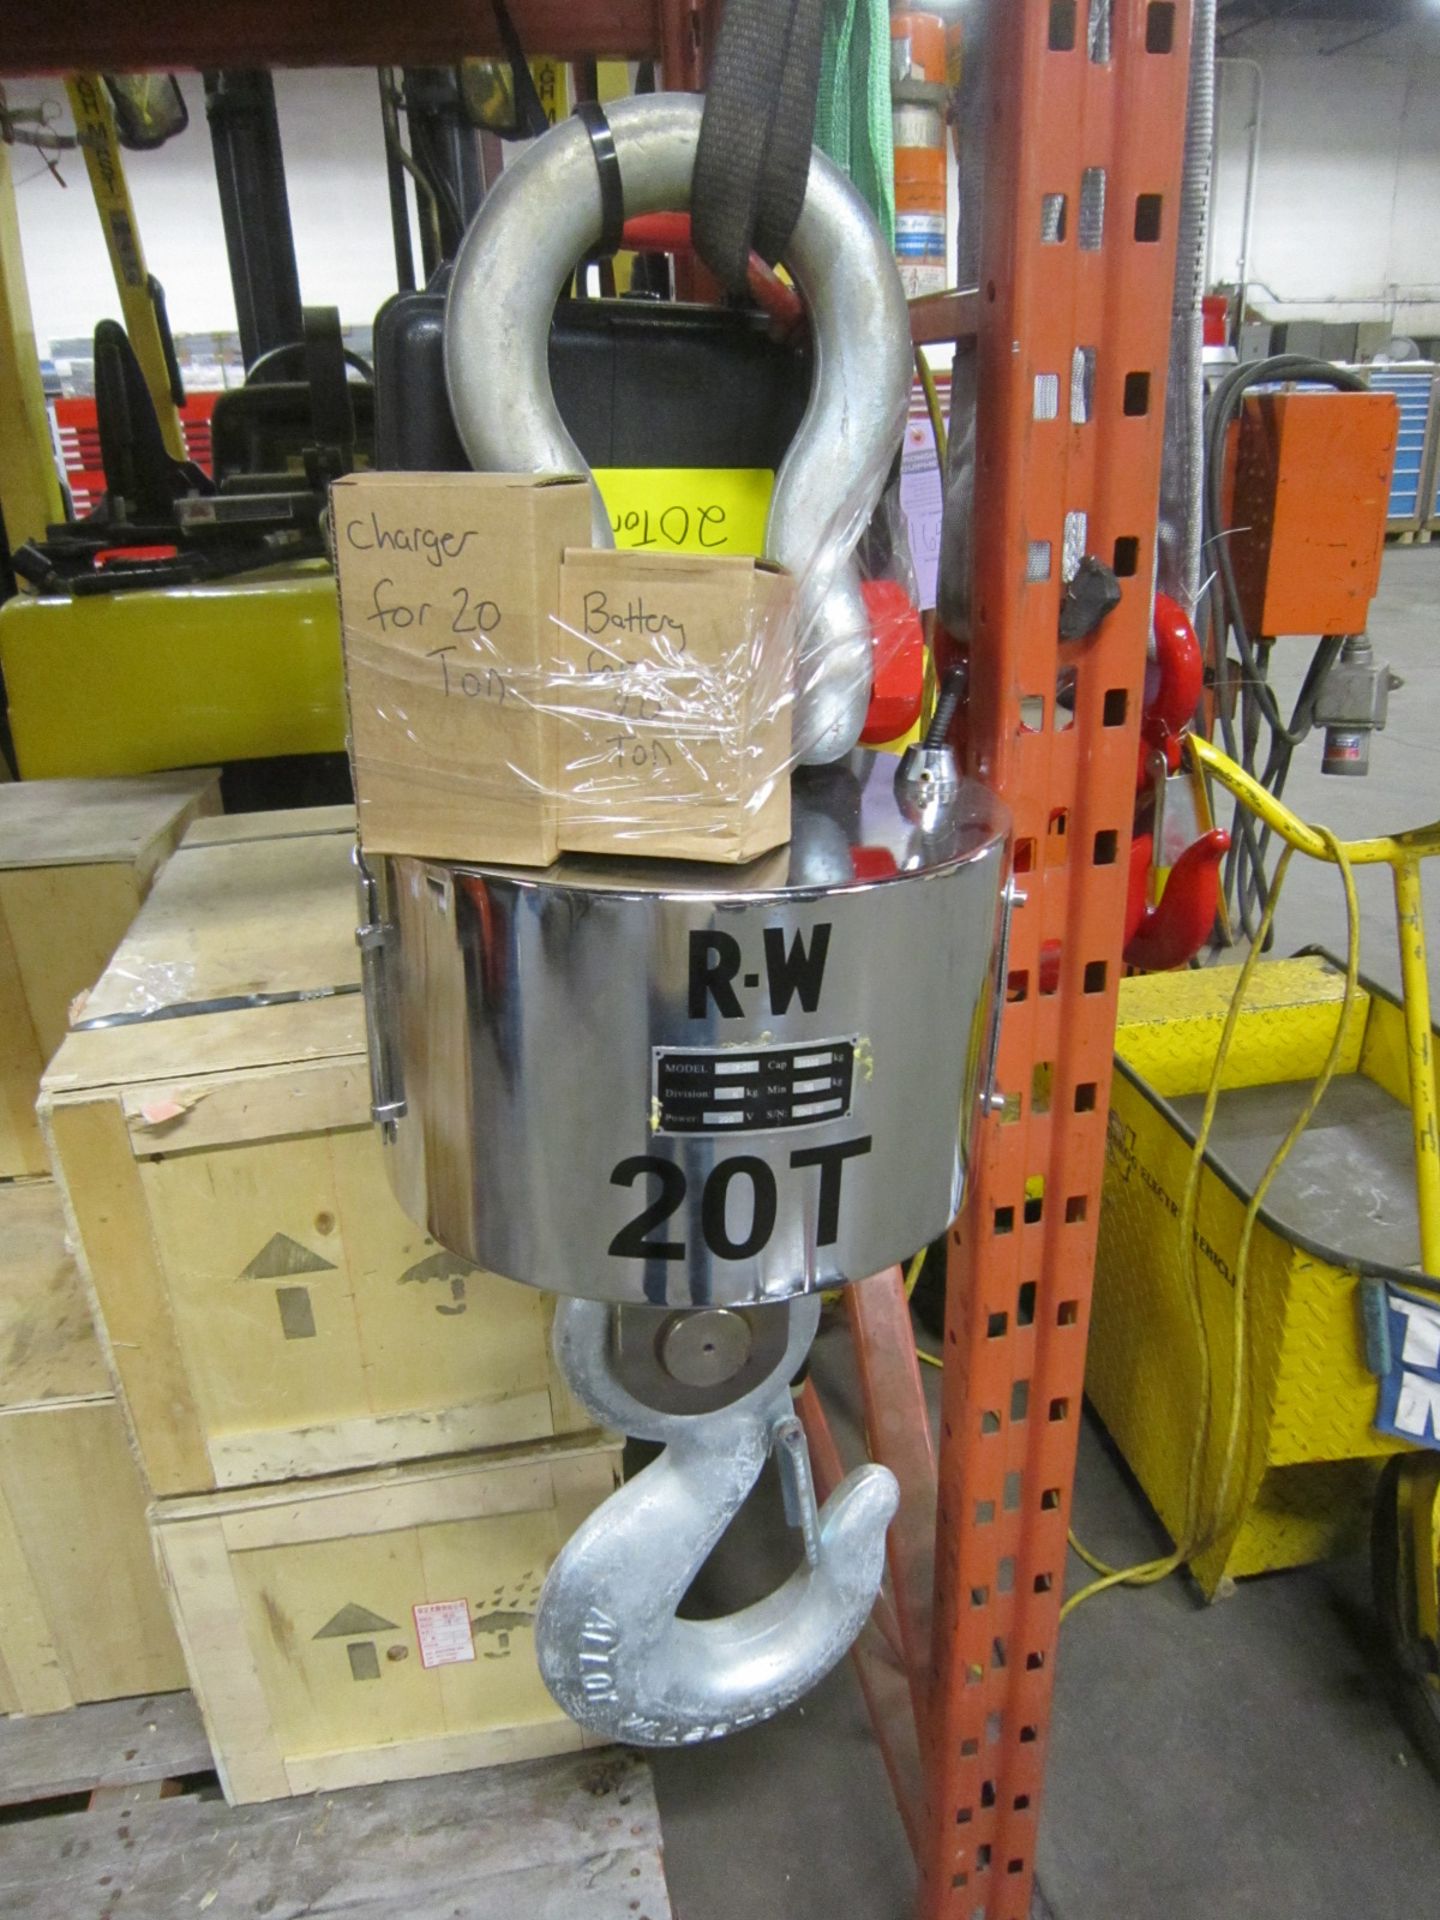 RW 20 TON Wireless Crane Scale with Digital Readout in Breifcase with charger up to 40000lbs